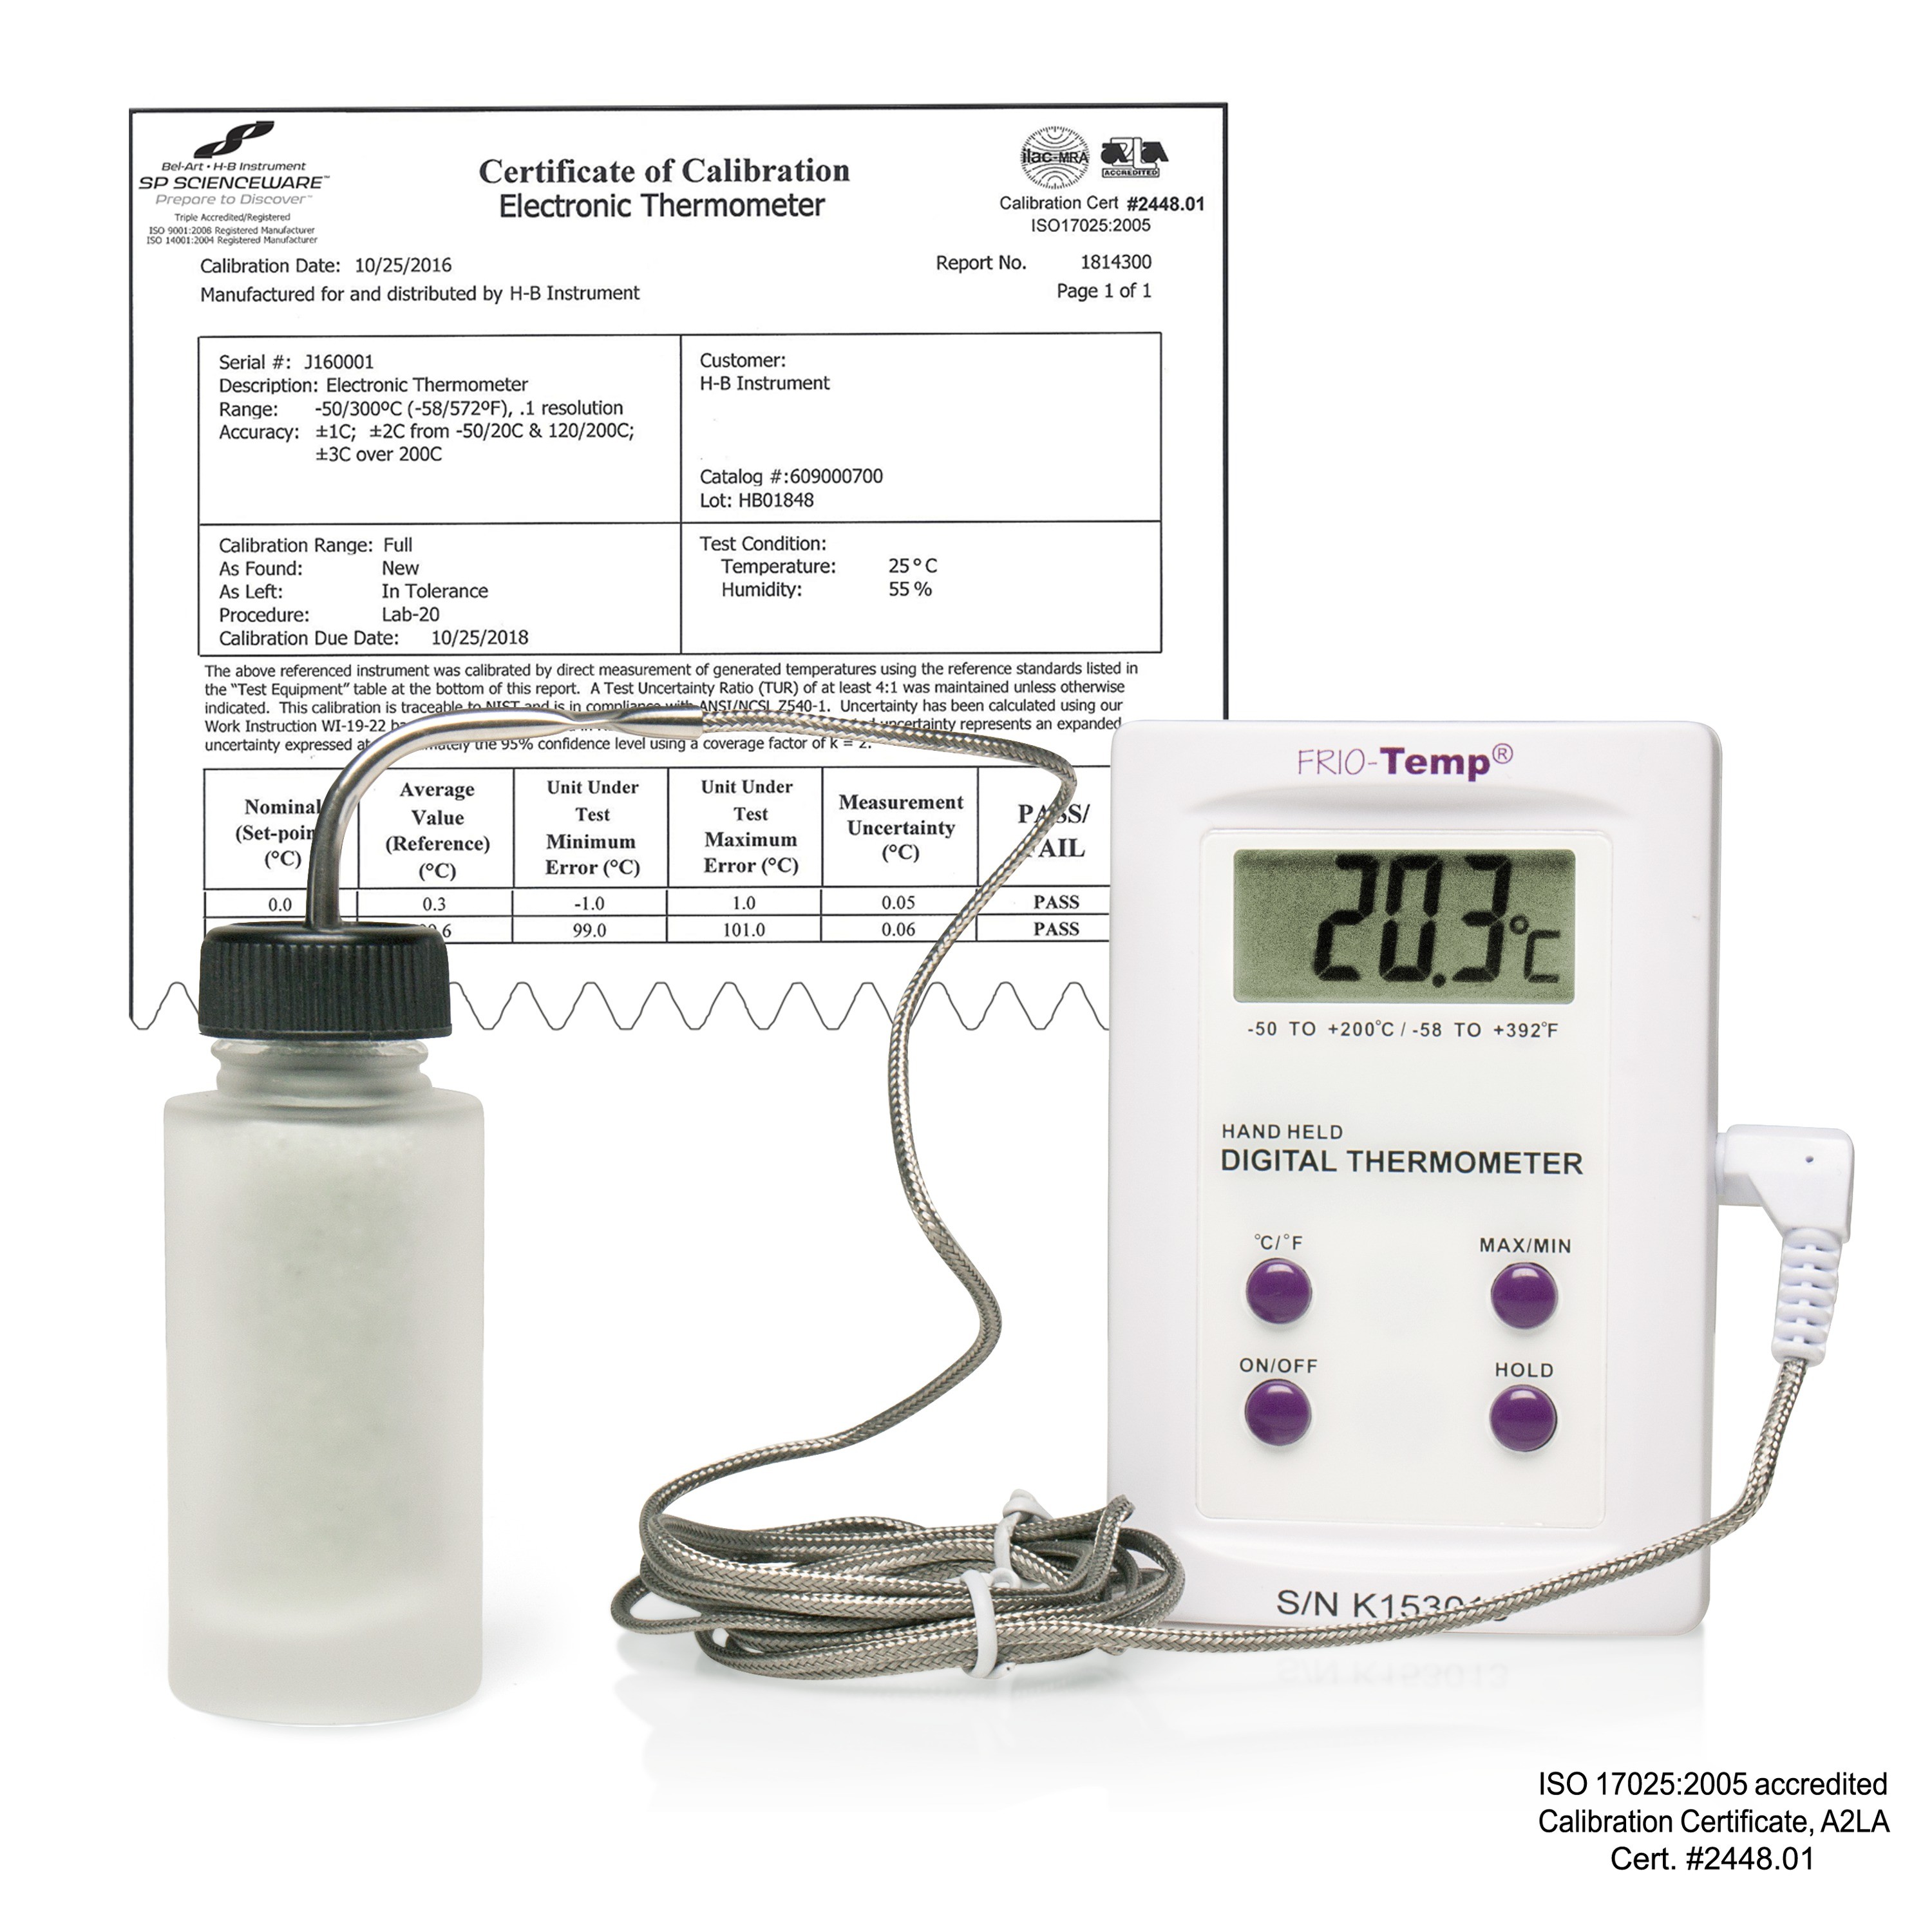 SP Bel-Art, H-B DURAC RTD Electronic Thermometer